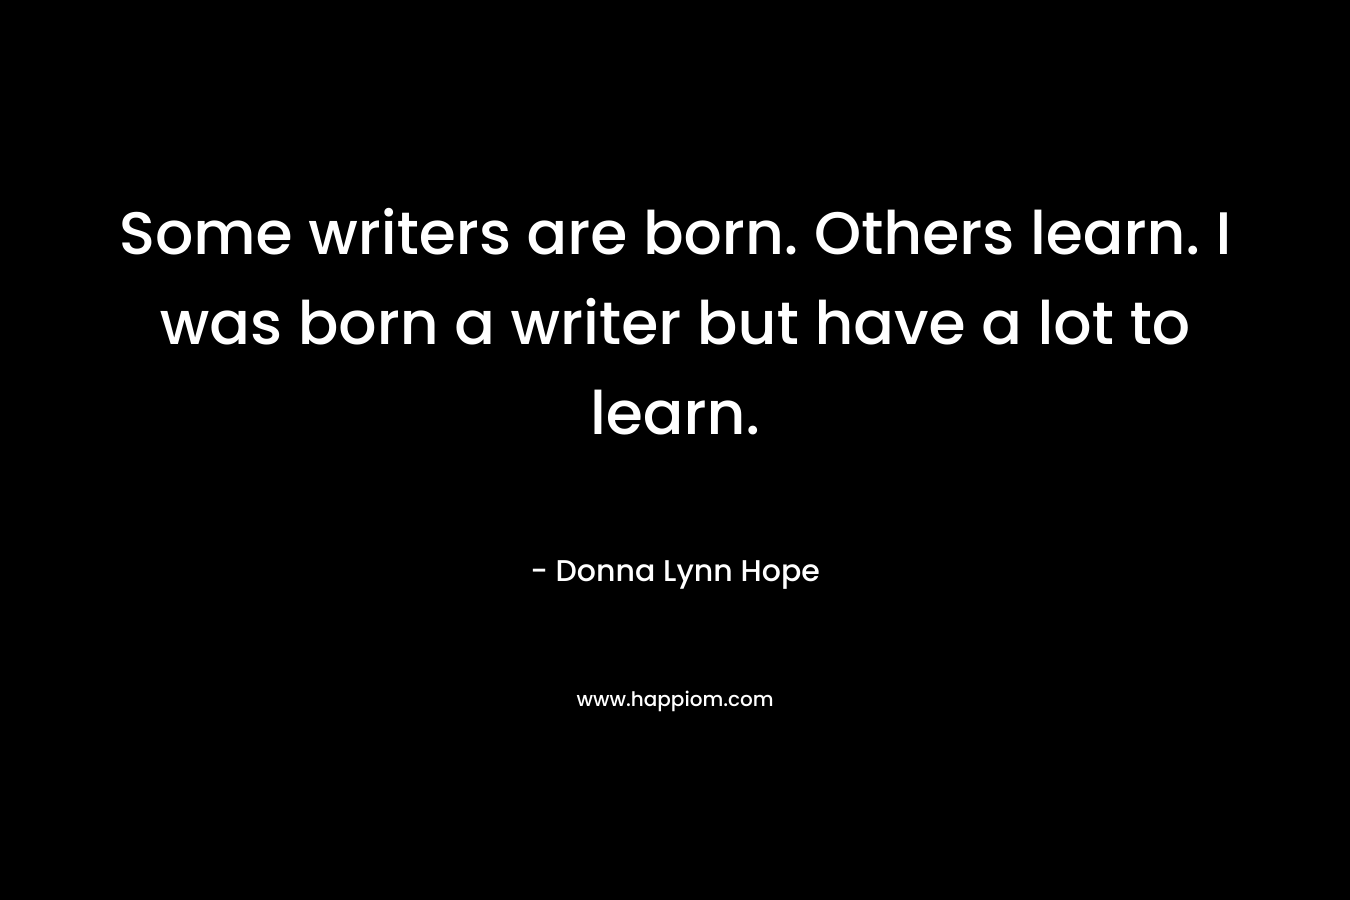 Some writers are born. Others learn. I was born a writer but have a lot to learn.